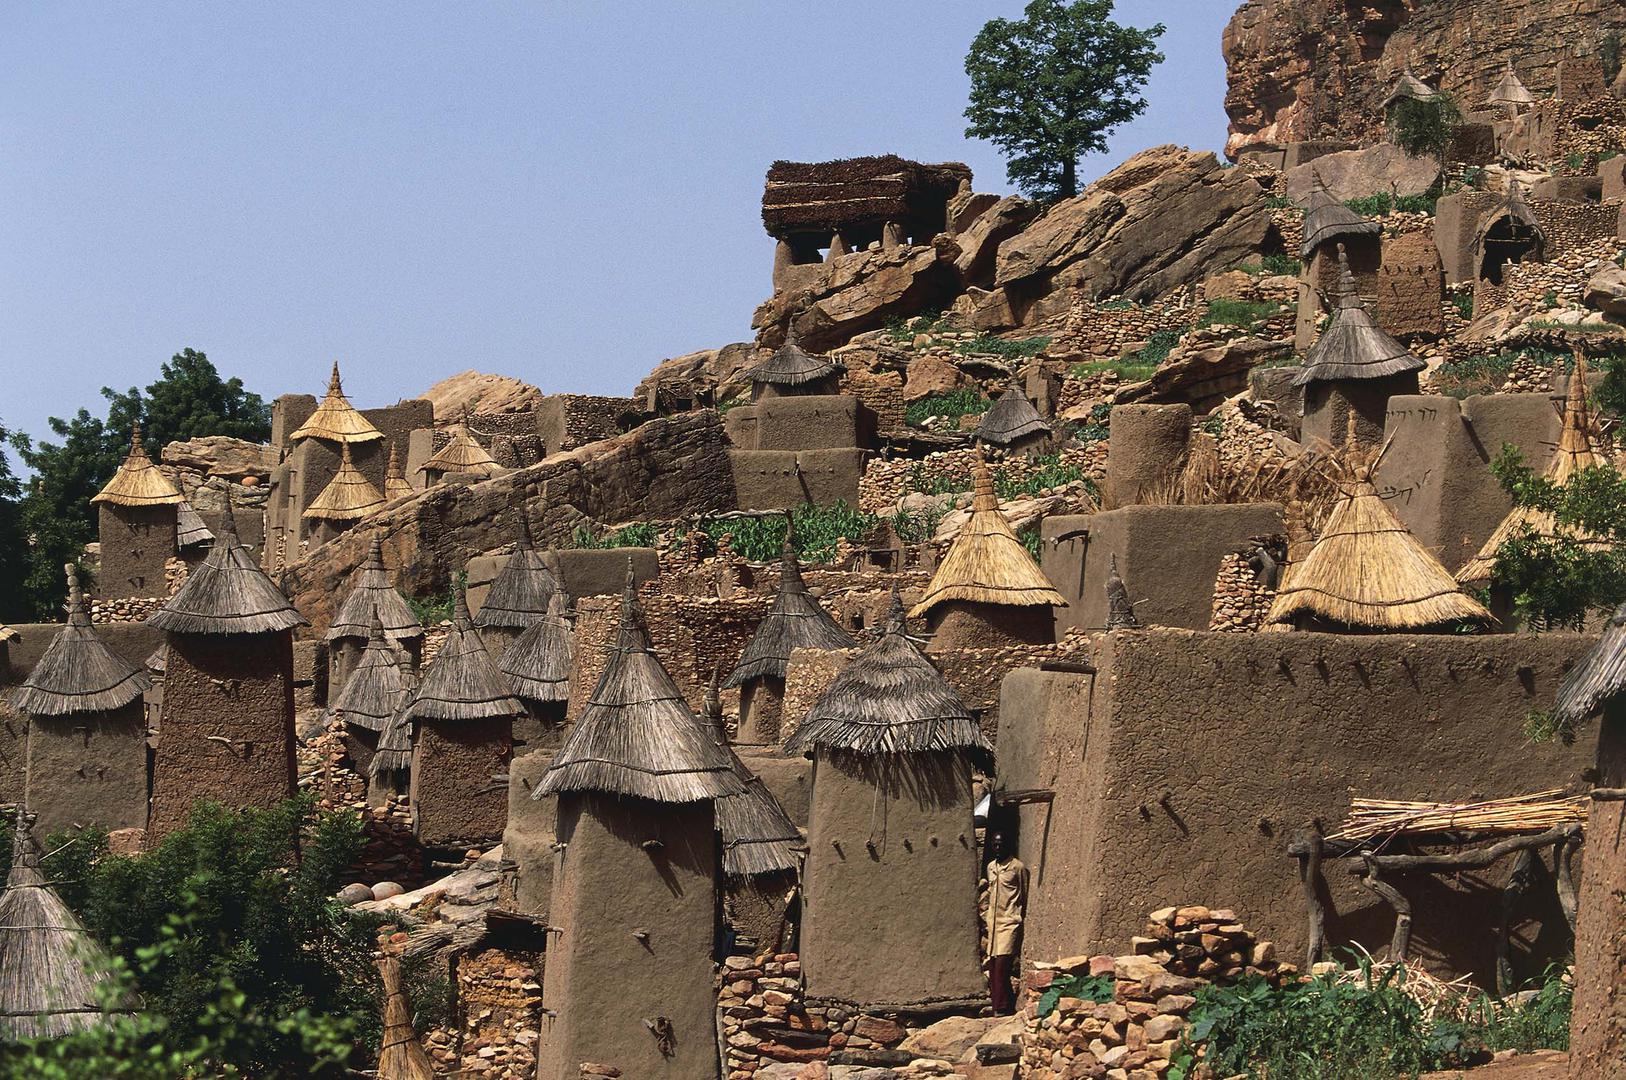 Ireli, Dogon village in Bandiagara Cercle. During 2018, over 200 civilians have been killed and numerous villages destroyed in communal violence between the Peuhl and Dogon ethnic groups in Mopti region. 